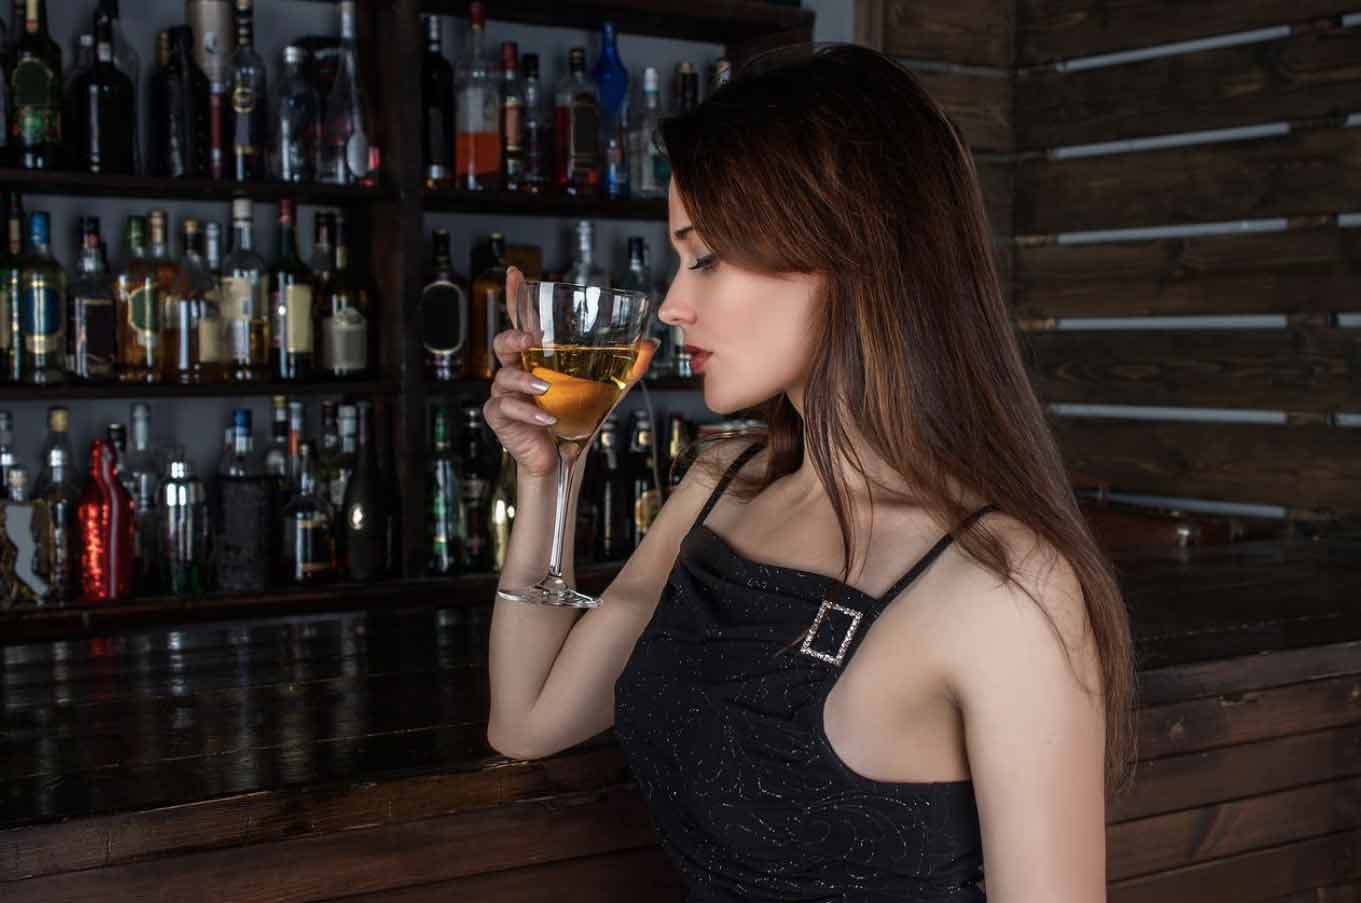 5 Fun Facts You Probably Don't Know About Booze